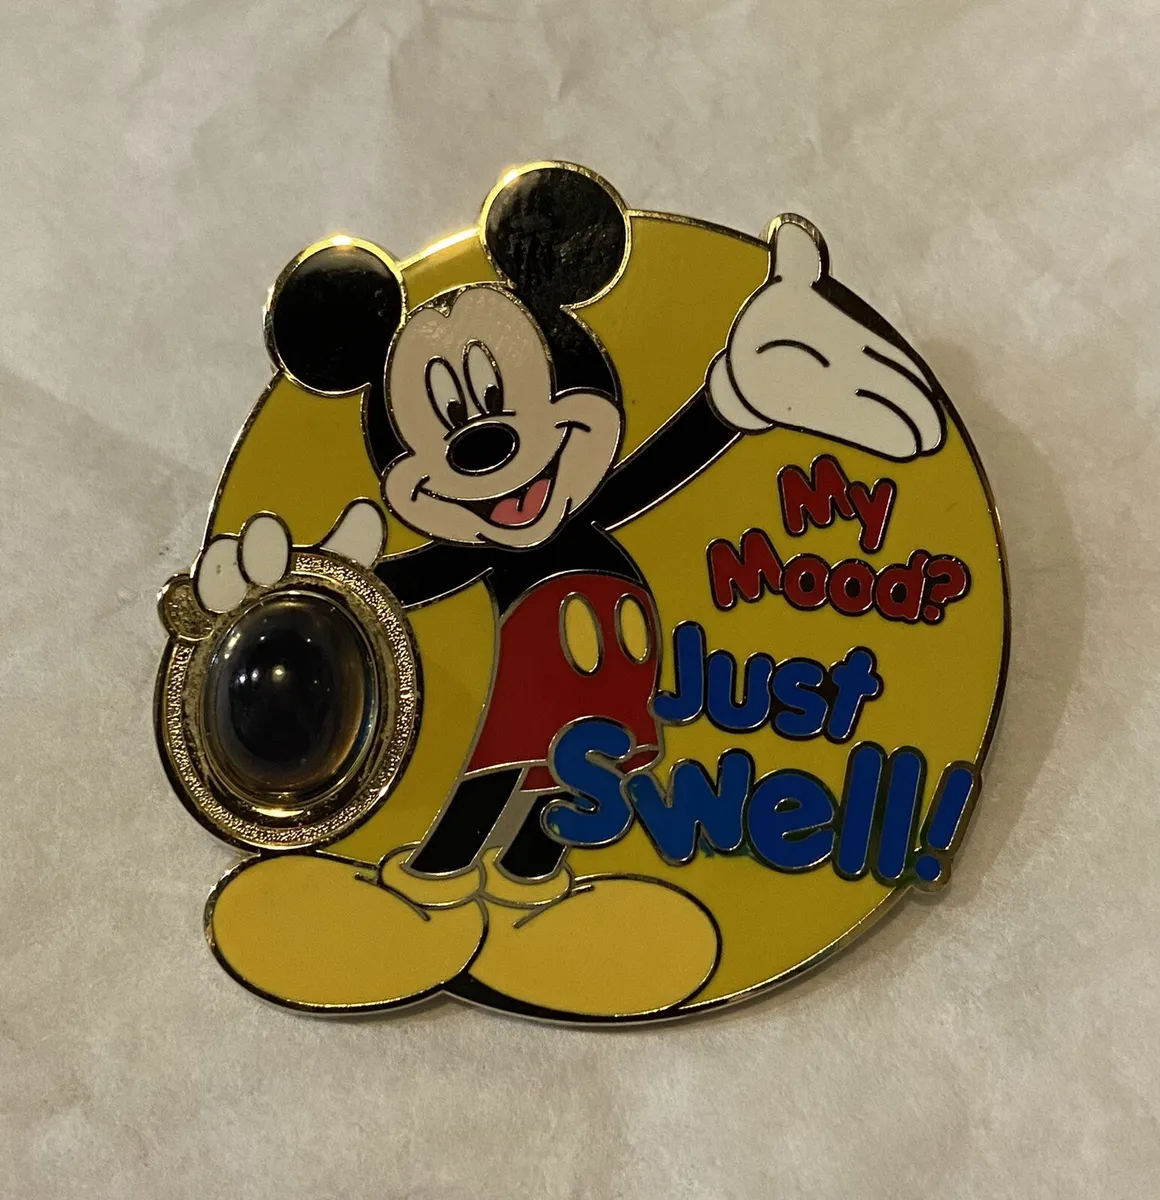 DISNEY MOOD STONE PIN MICKEY MOUSE "MY MOOD? JUST SWELL!"